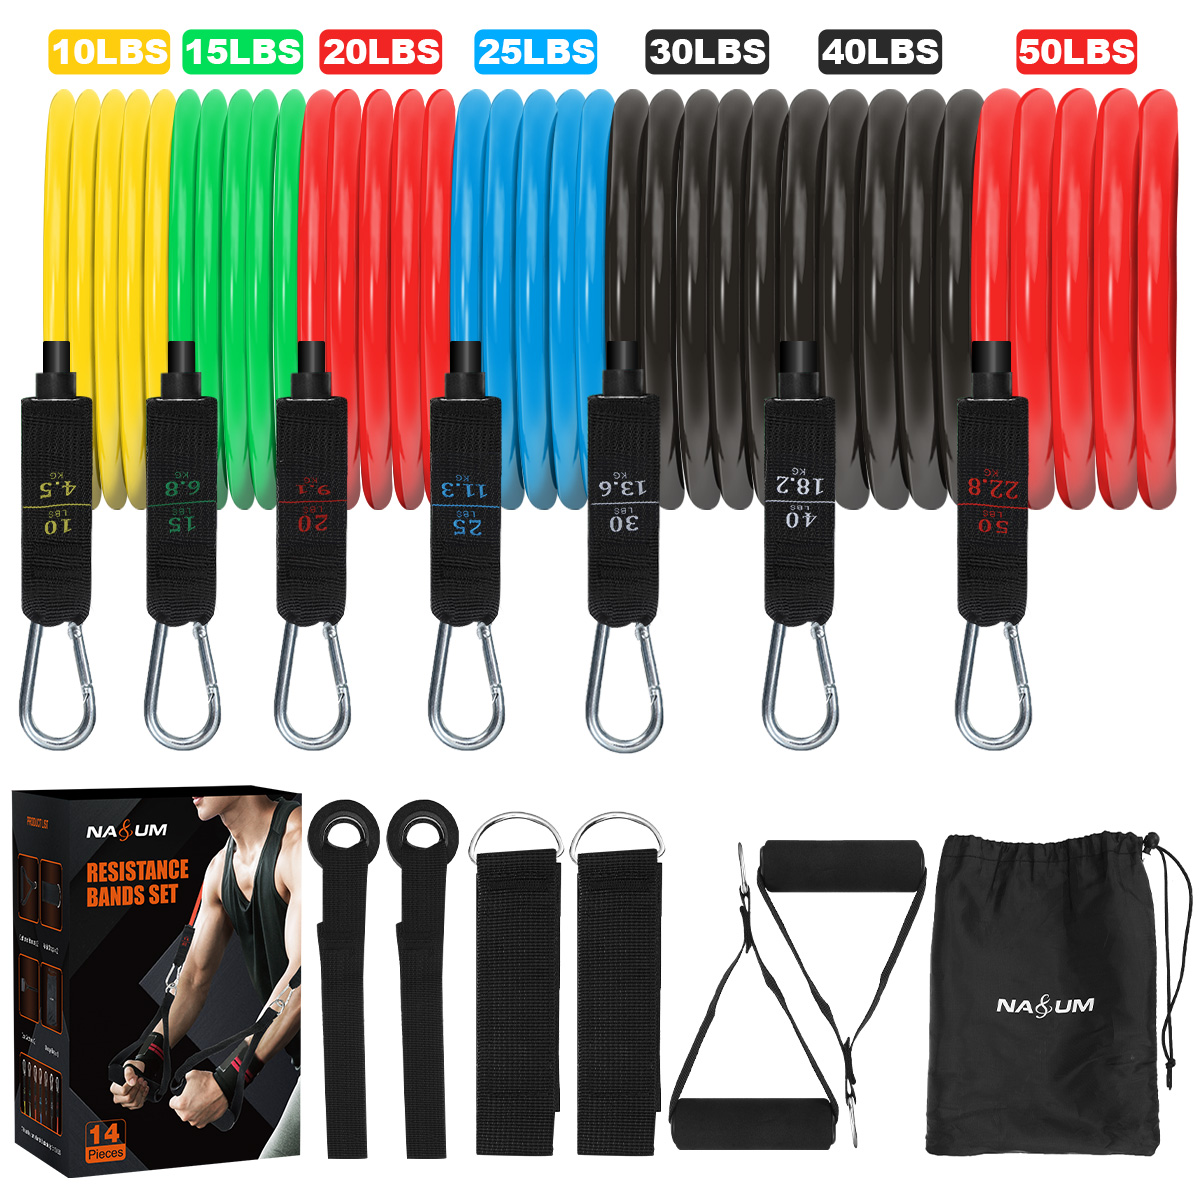 14-Pcs-Resistance-Bands-10152025304050lbs-Exercise-Bands-Sport-Fitness-for-Physical-Therapy-Home-Gym-1884421-1